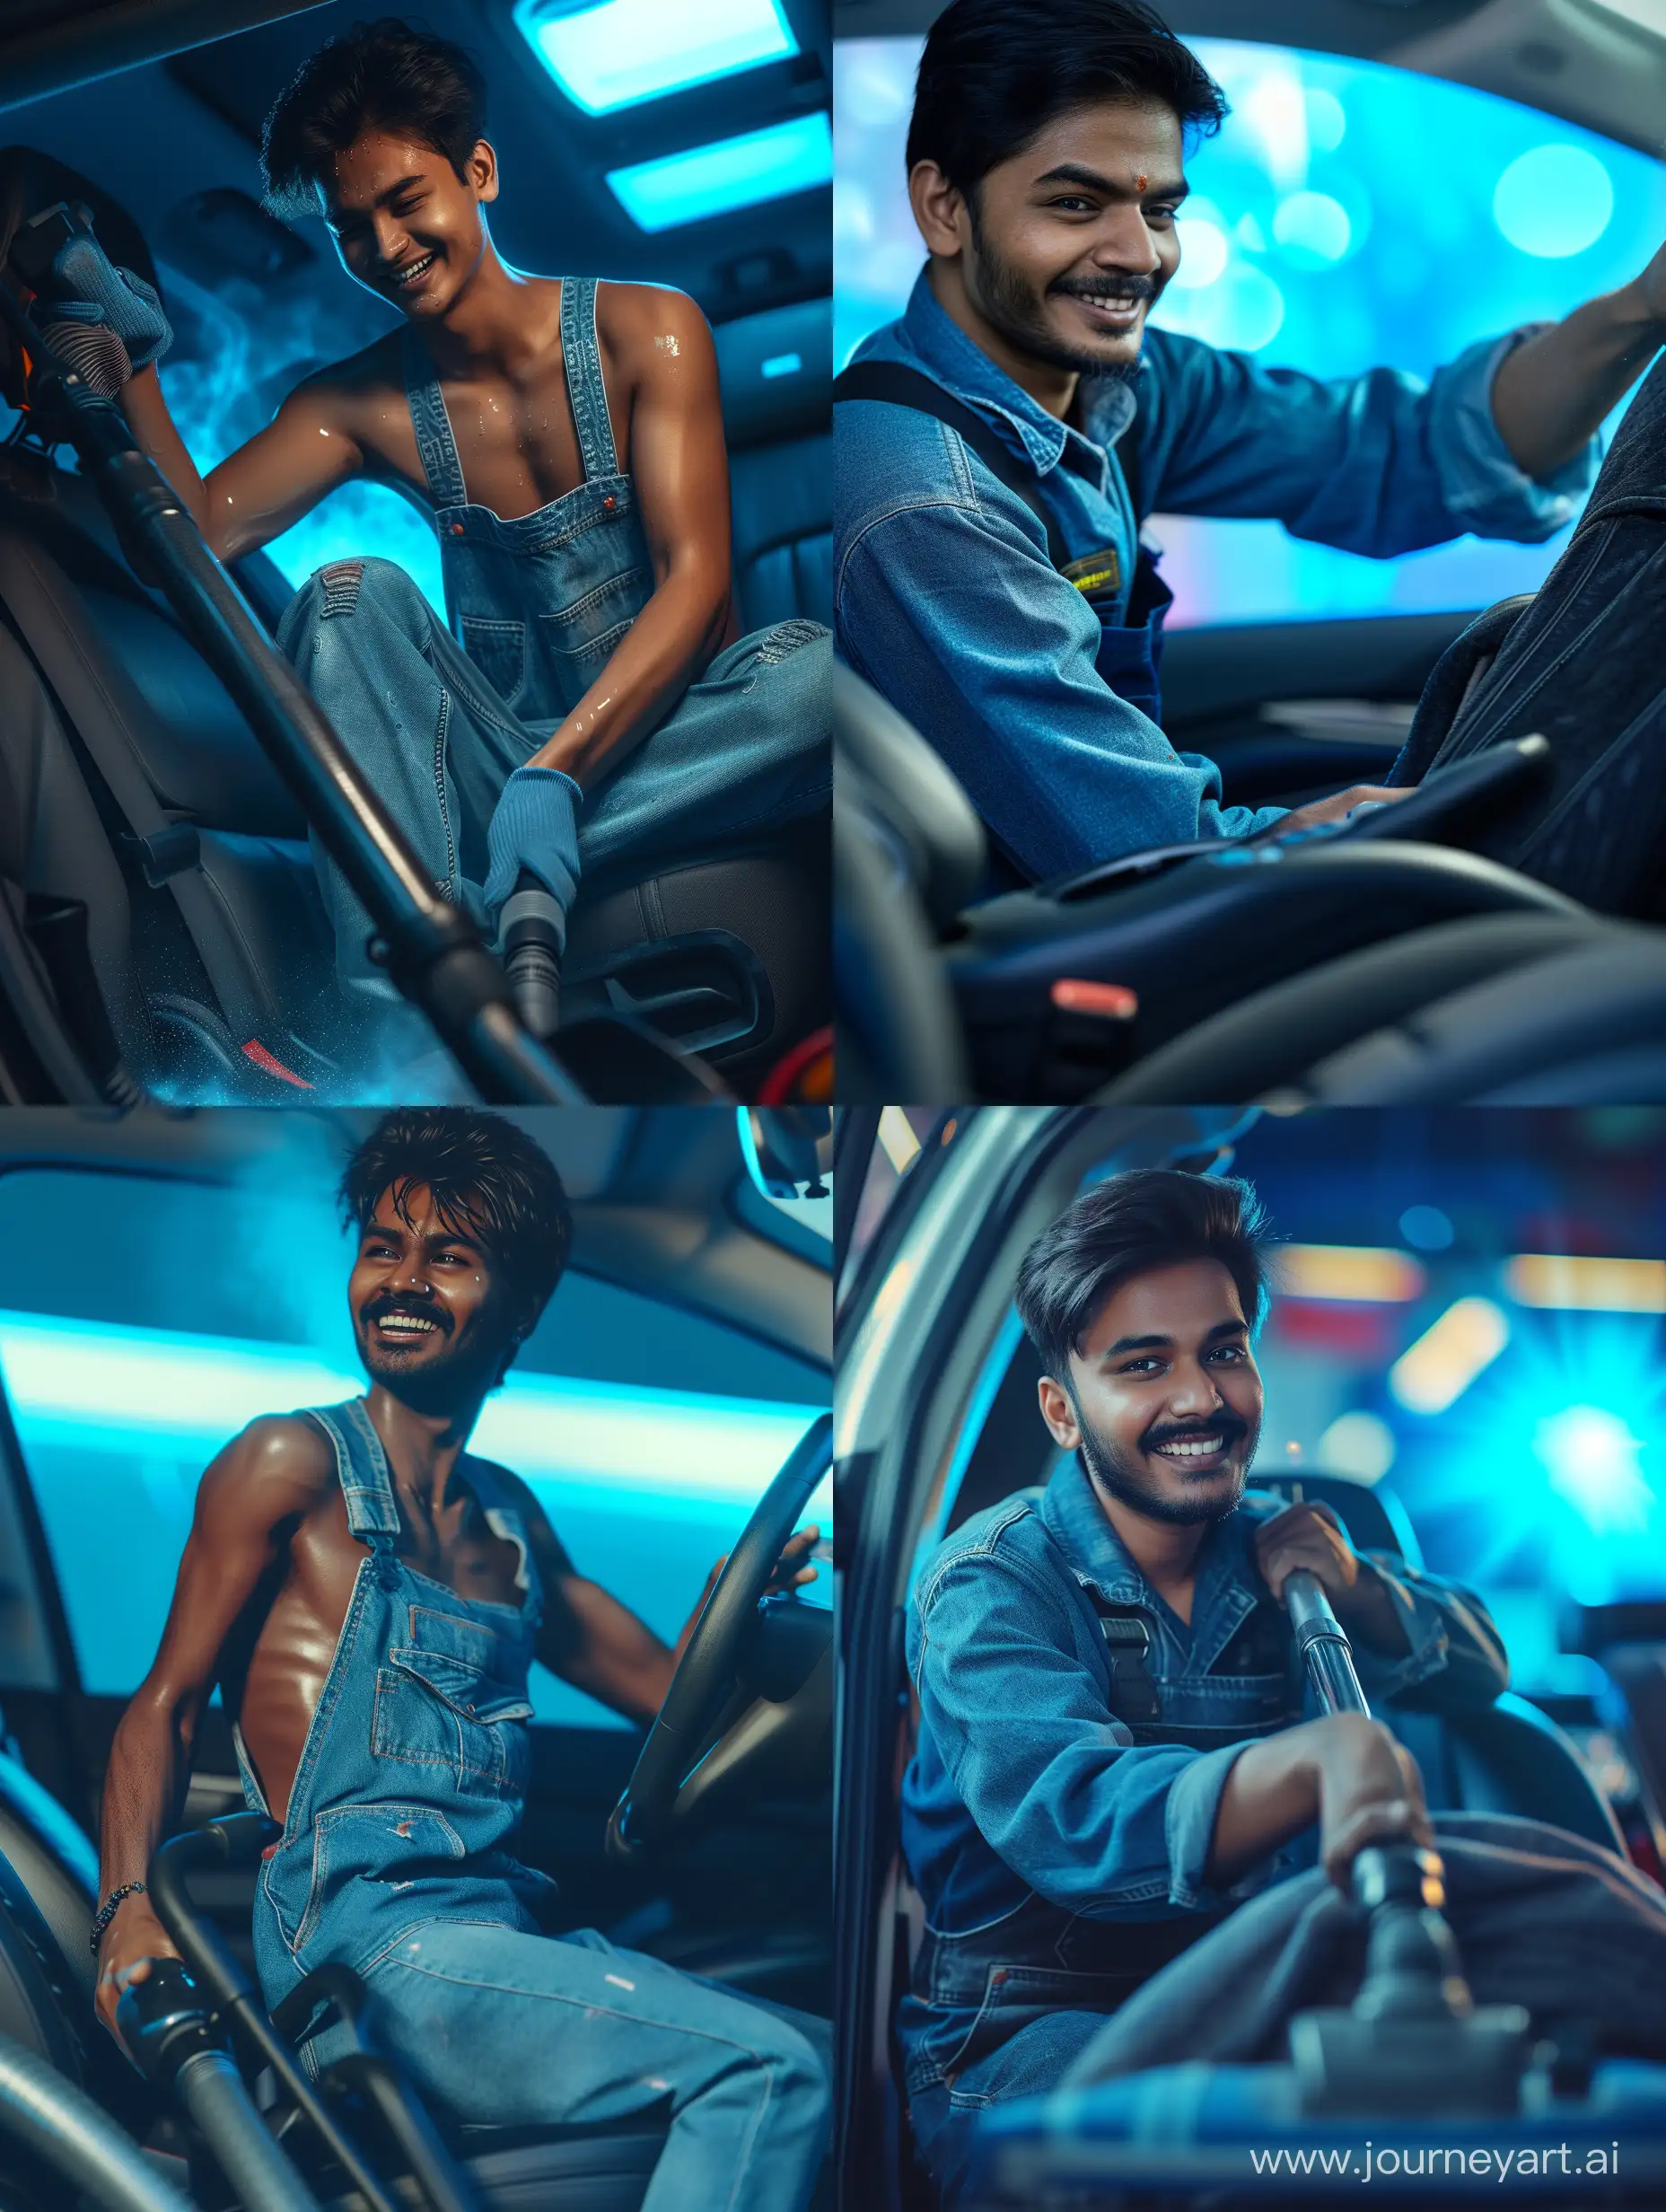 Ultra realistic, a Bangladeshi worker is vacuuming a car seat. atmosphere in the car. cheerful and smiling face. wearing blue jean overalls. there is a blue light behind.. canon eos-id x mark iii dslr --v 6.0